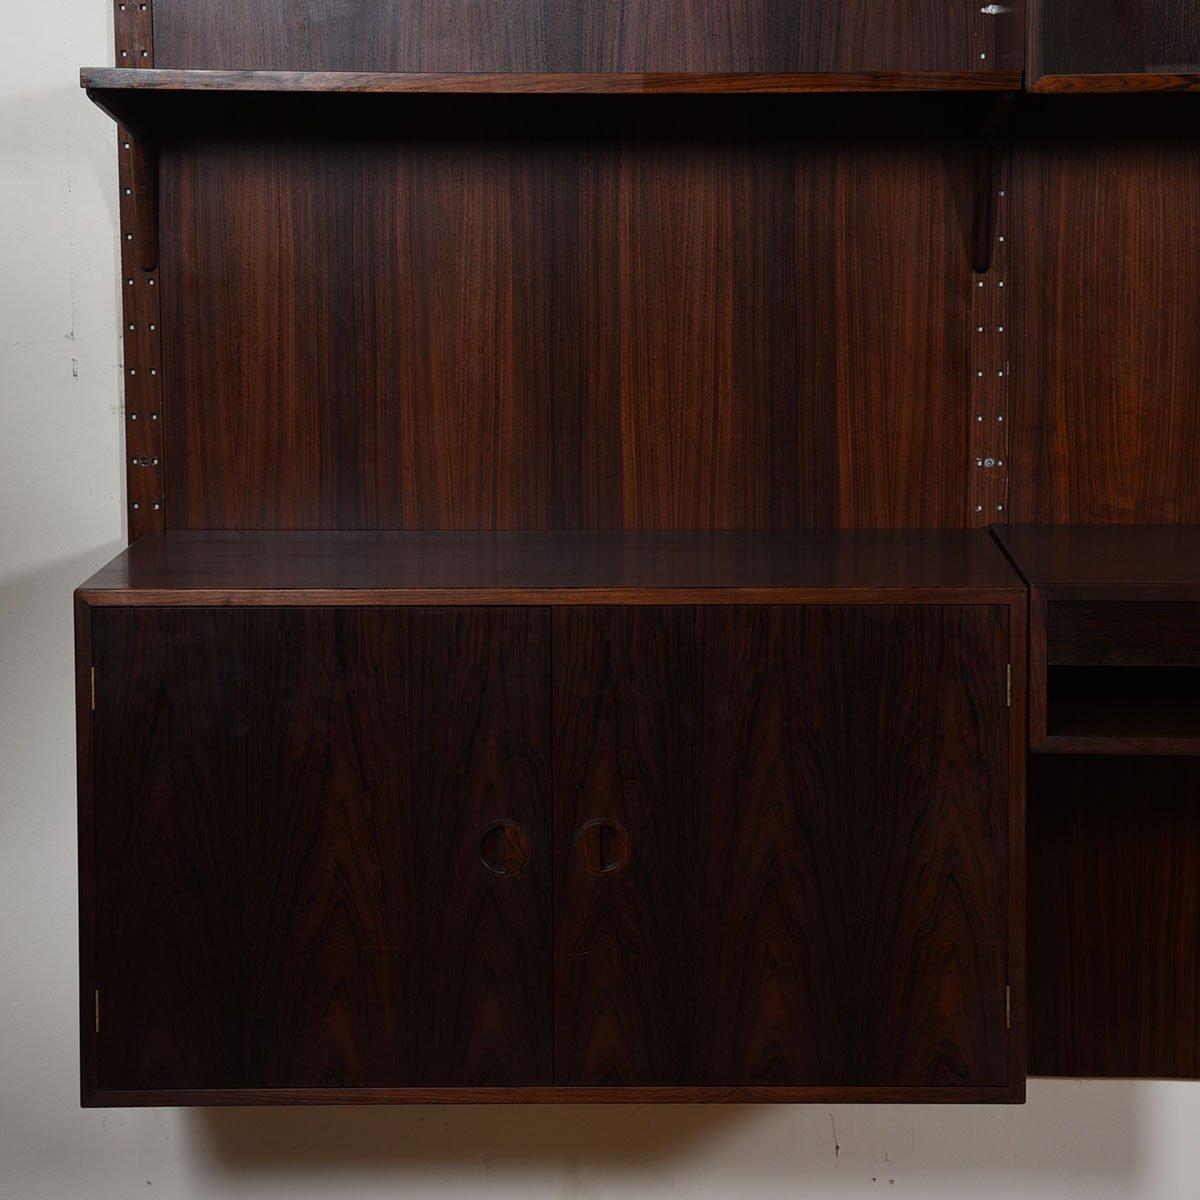 3-Column Danish Modern Rosewood Adjustable Wall Unit with Paneling In Good Condition For Sale In Kensington, MD